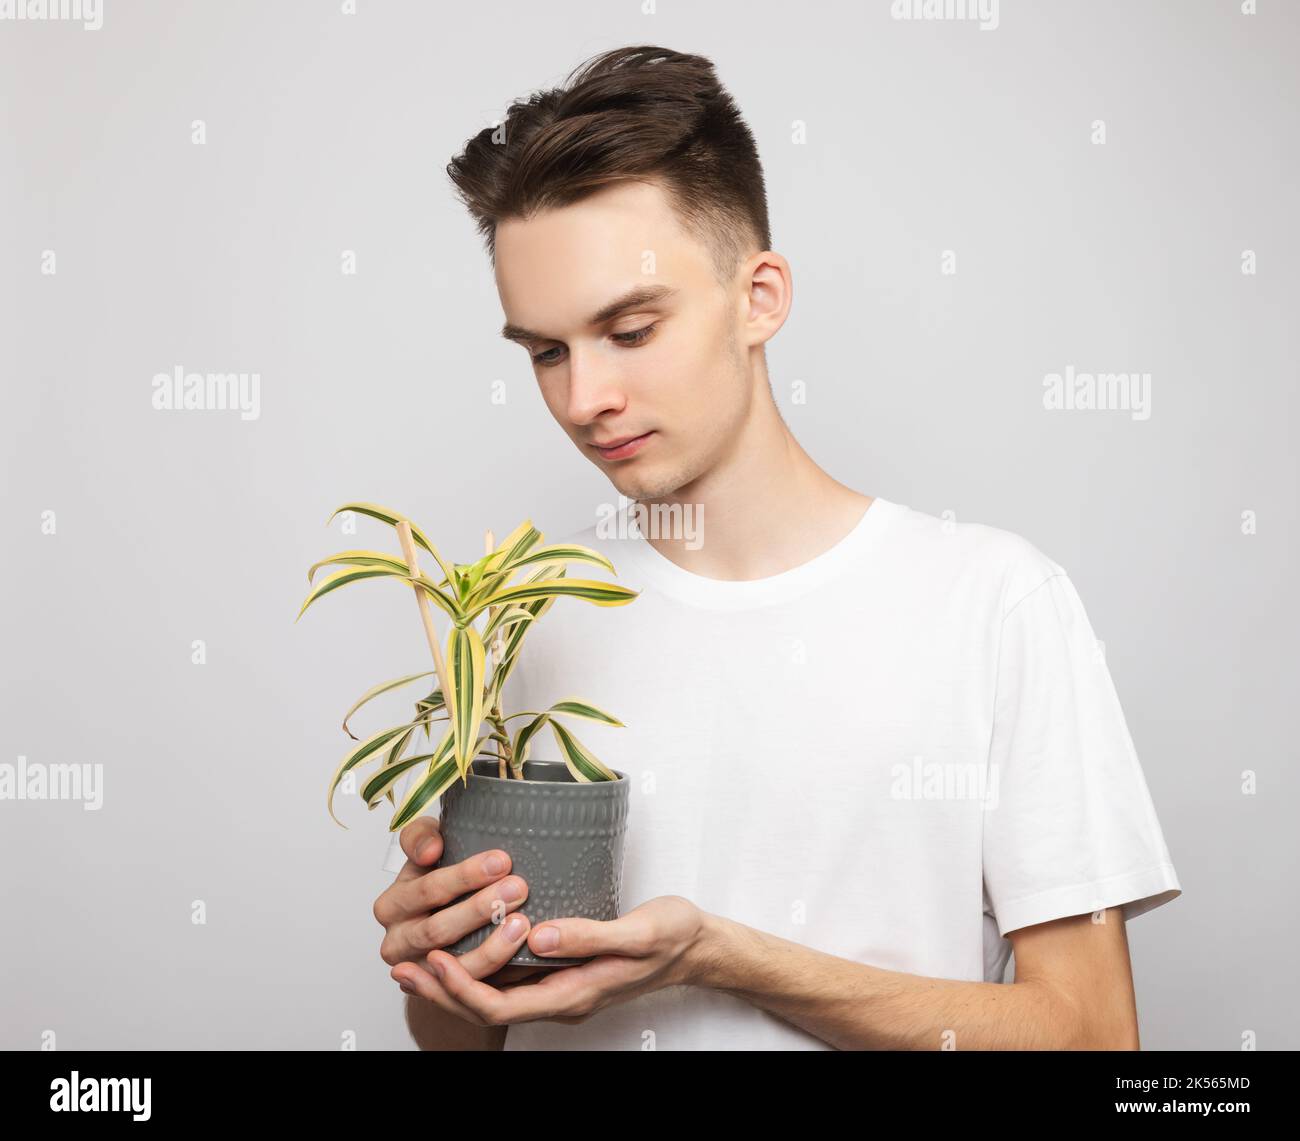 Portrait of cheerful young man wearing white t-shirt holding potted house plant. Studio shot on gray background Stock Photo